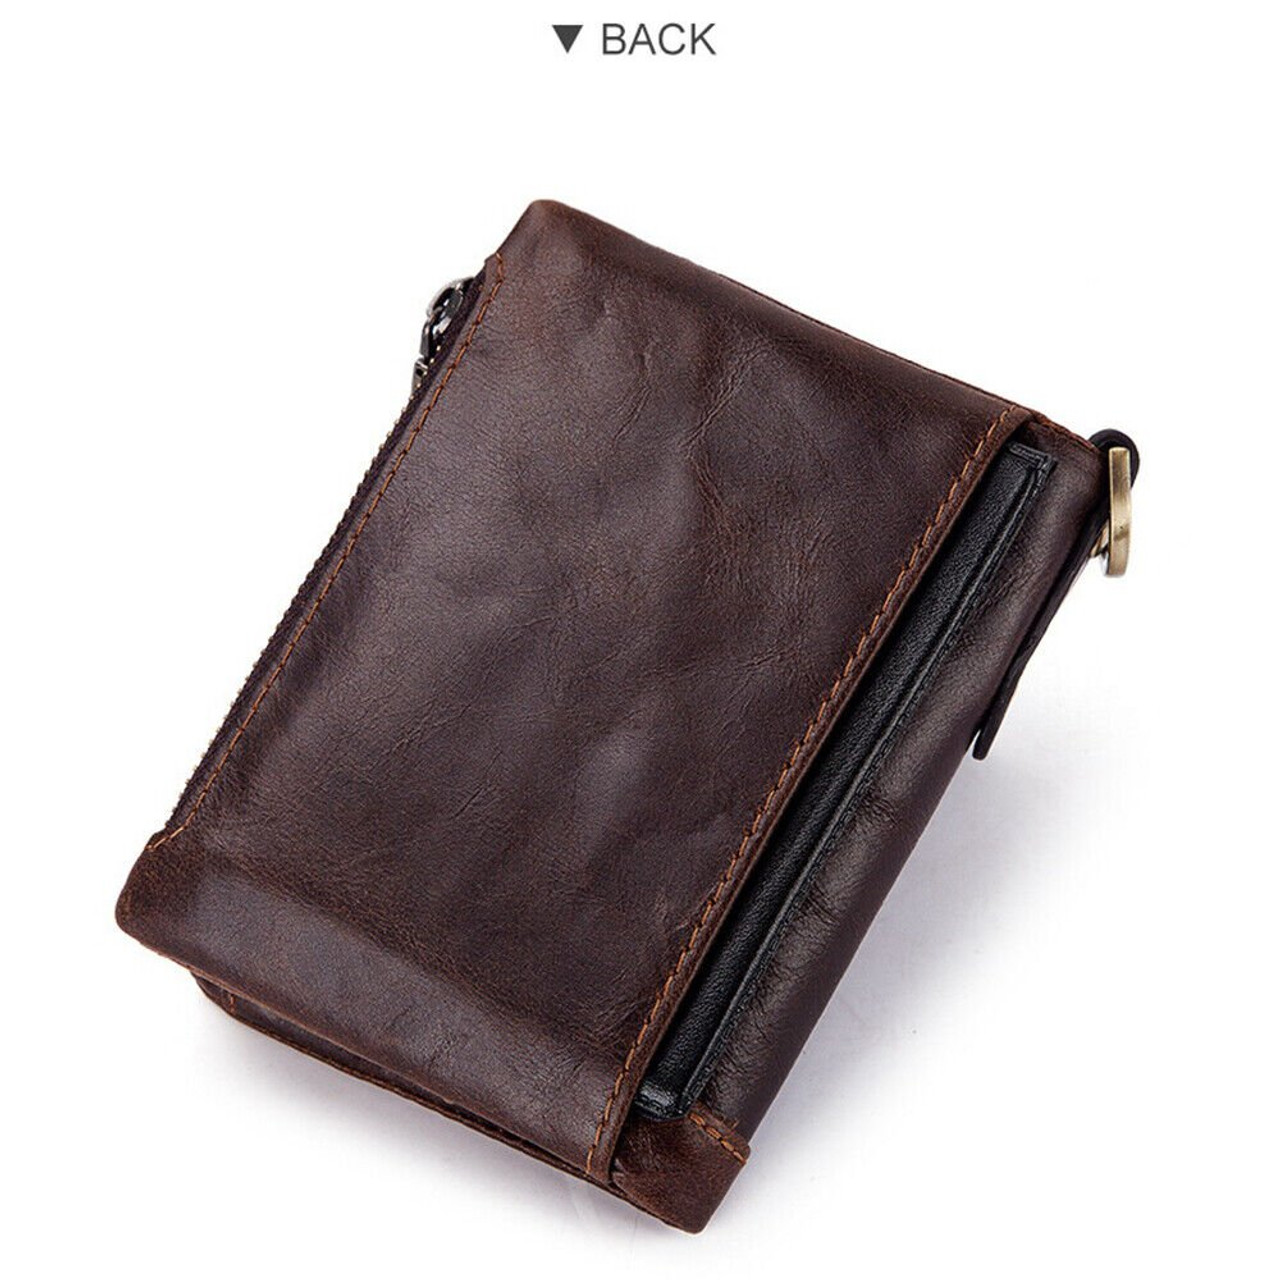 Men's RFID Blocking Wallet Leather Purse Card Slots Coins Holder Chain - Battery Mate